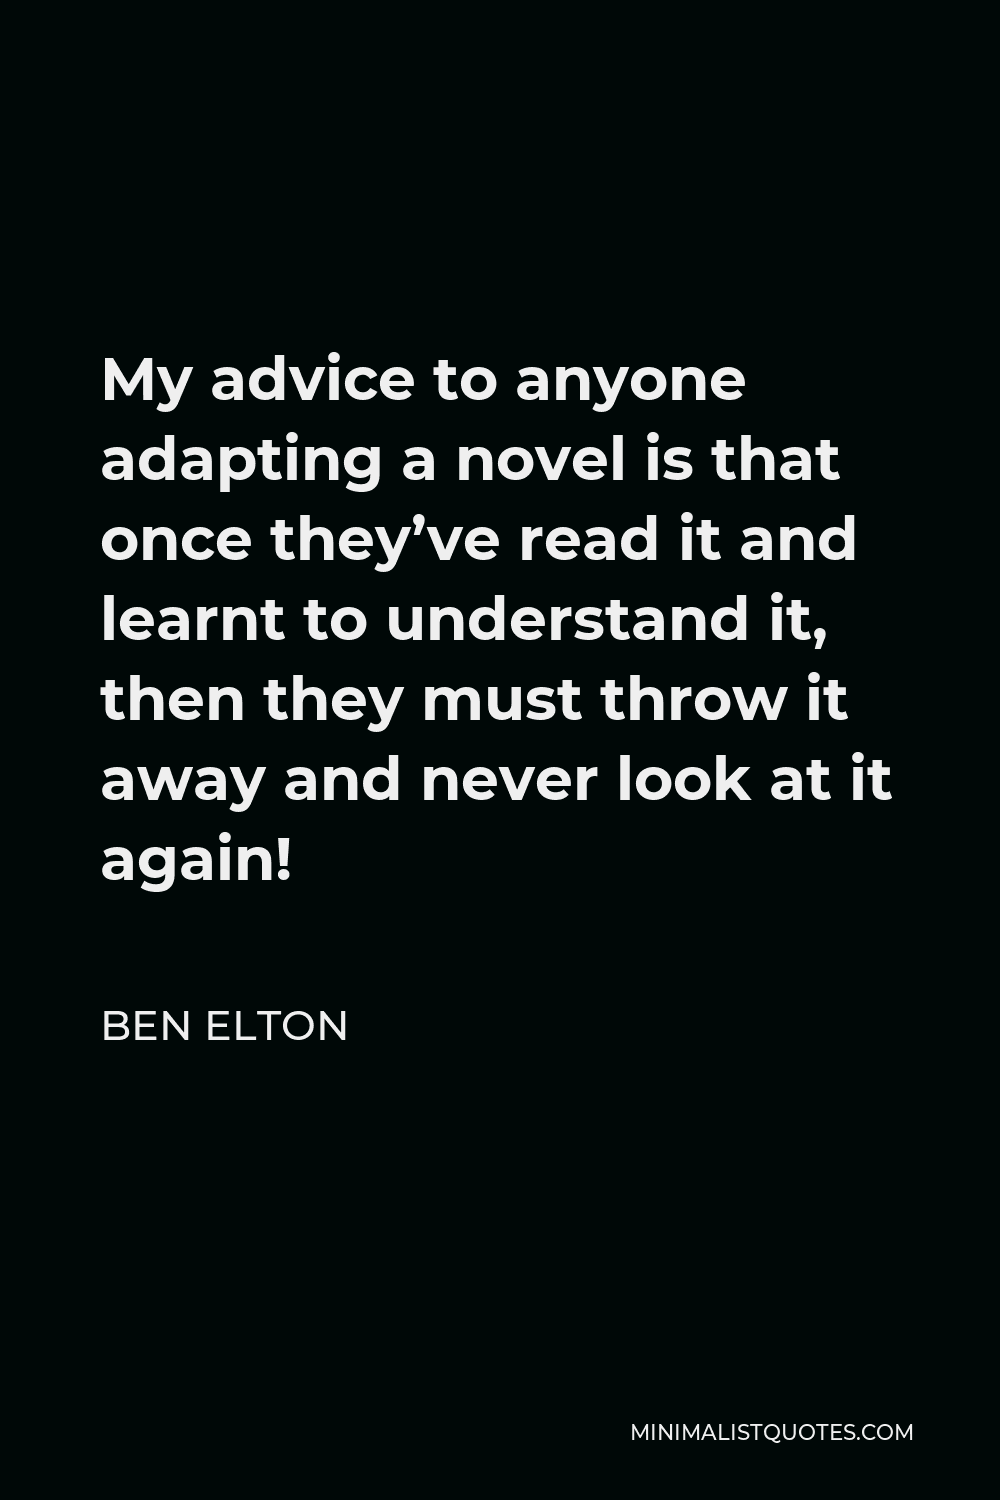 Ben Elton Quote - My advice to anyone adapting a novel is that once they’ve read it and learnt to understand it, then they must throw it away and never look at it again!